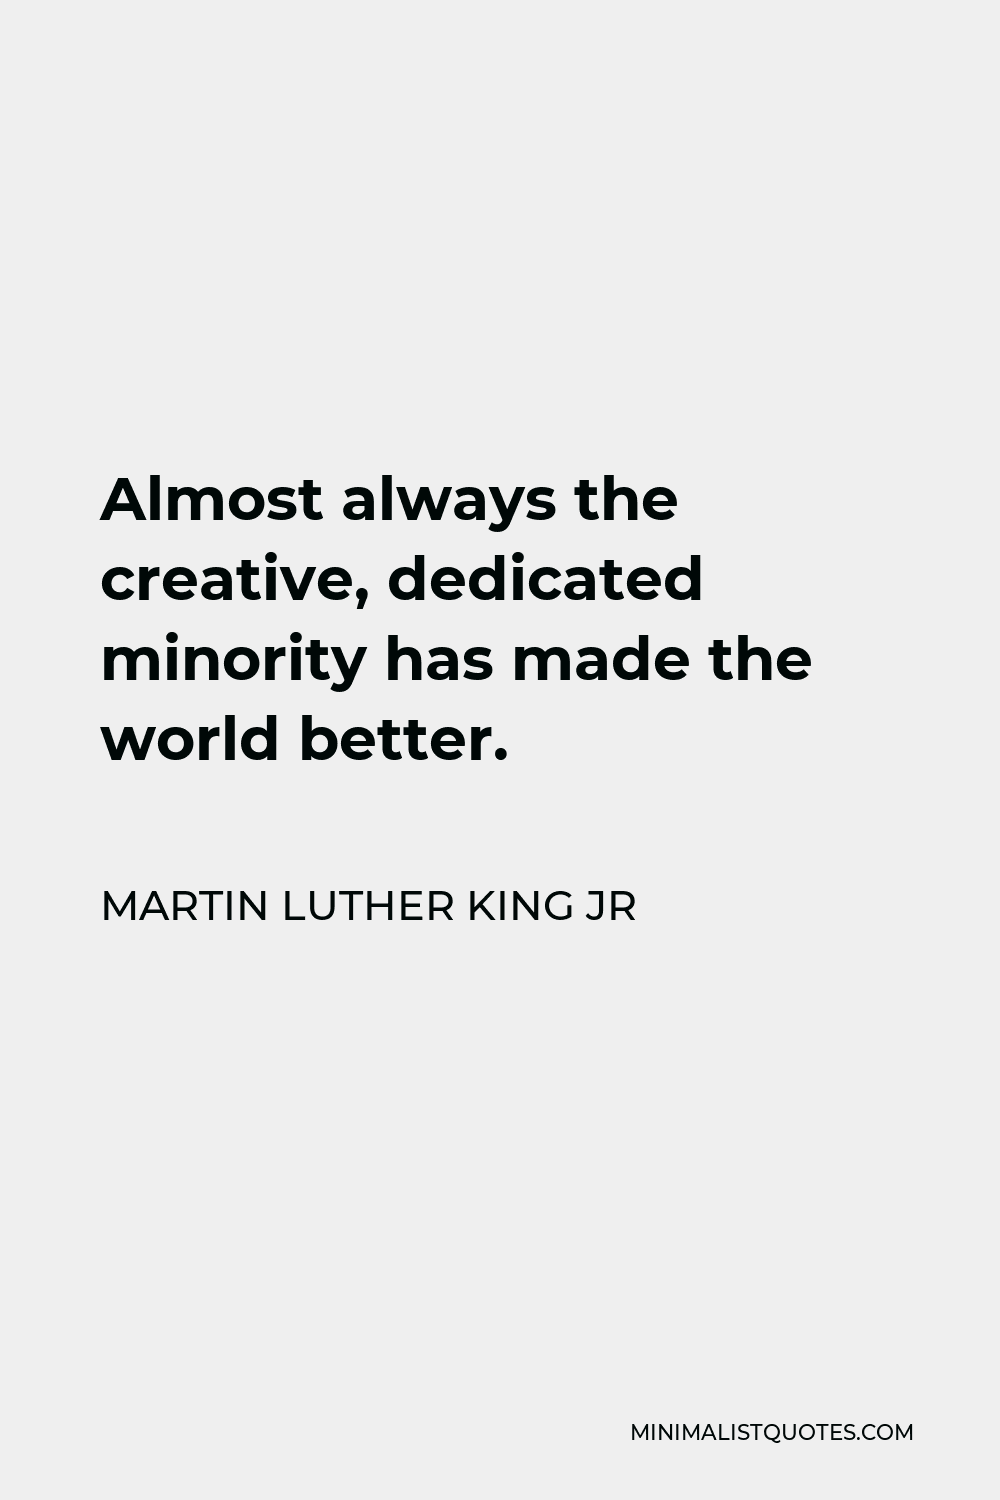 Martin Luther King Jr Quote - Almost always the creative, dedicated minority has made the world better.